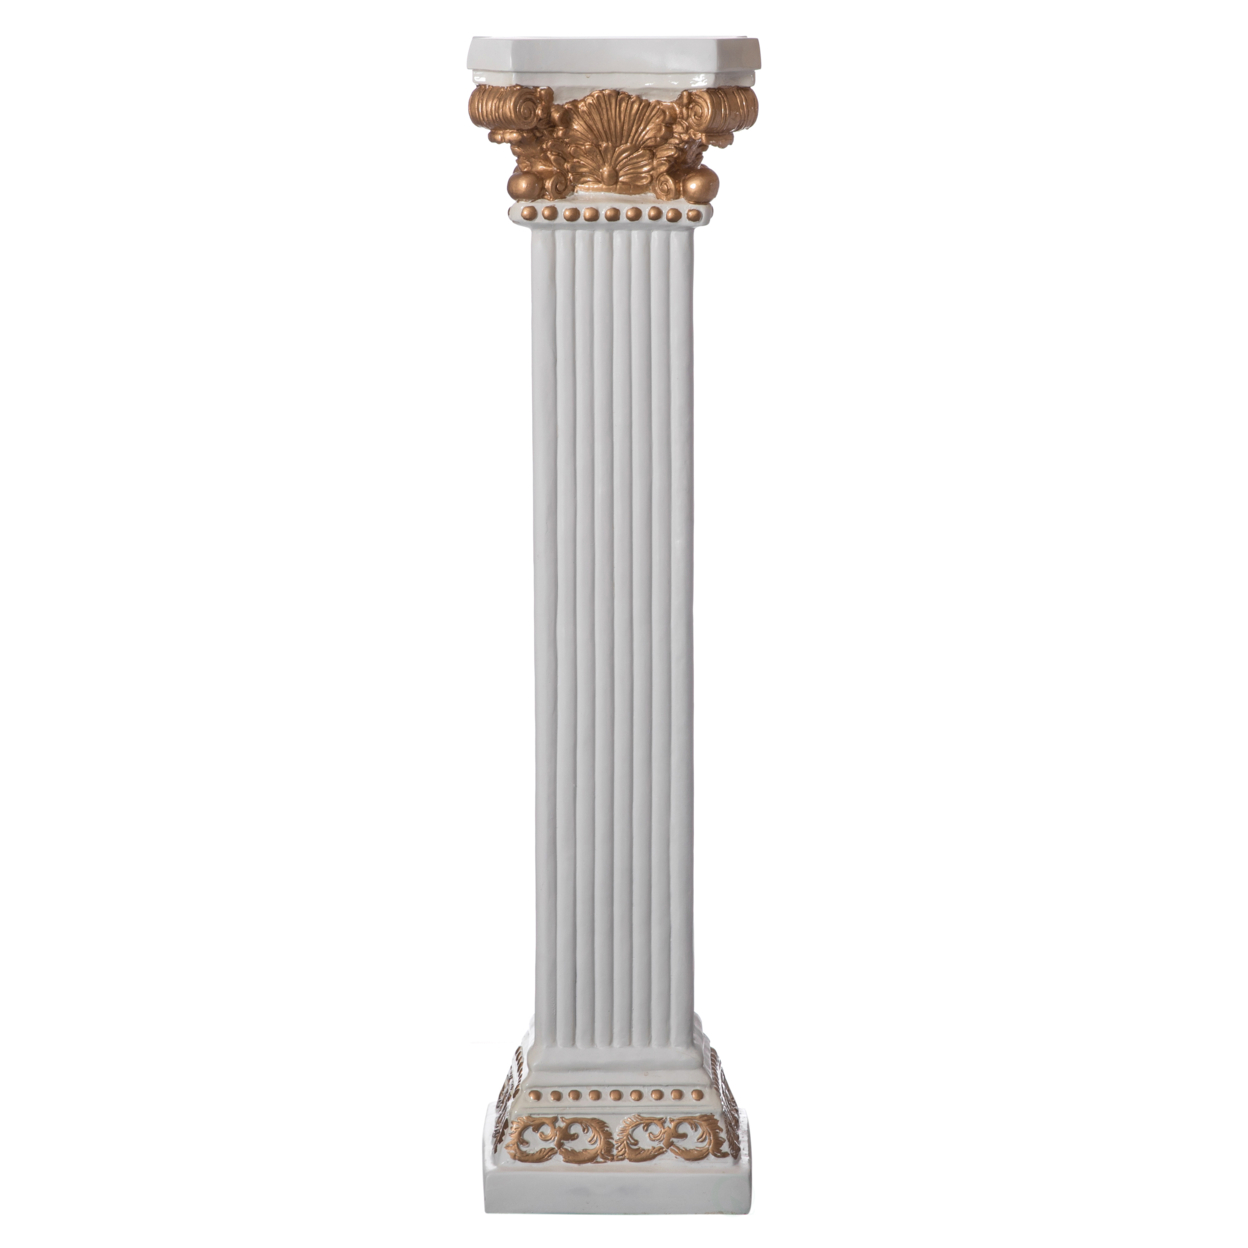 Decorative Modern Fiberglass White And Gold Plinth Roman Style Column Ionic Pedestal Vase Stand For Wedding, Living Room, Or Dining Room - 4